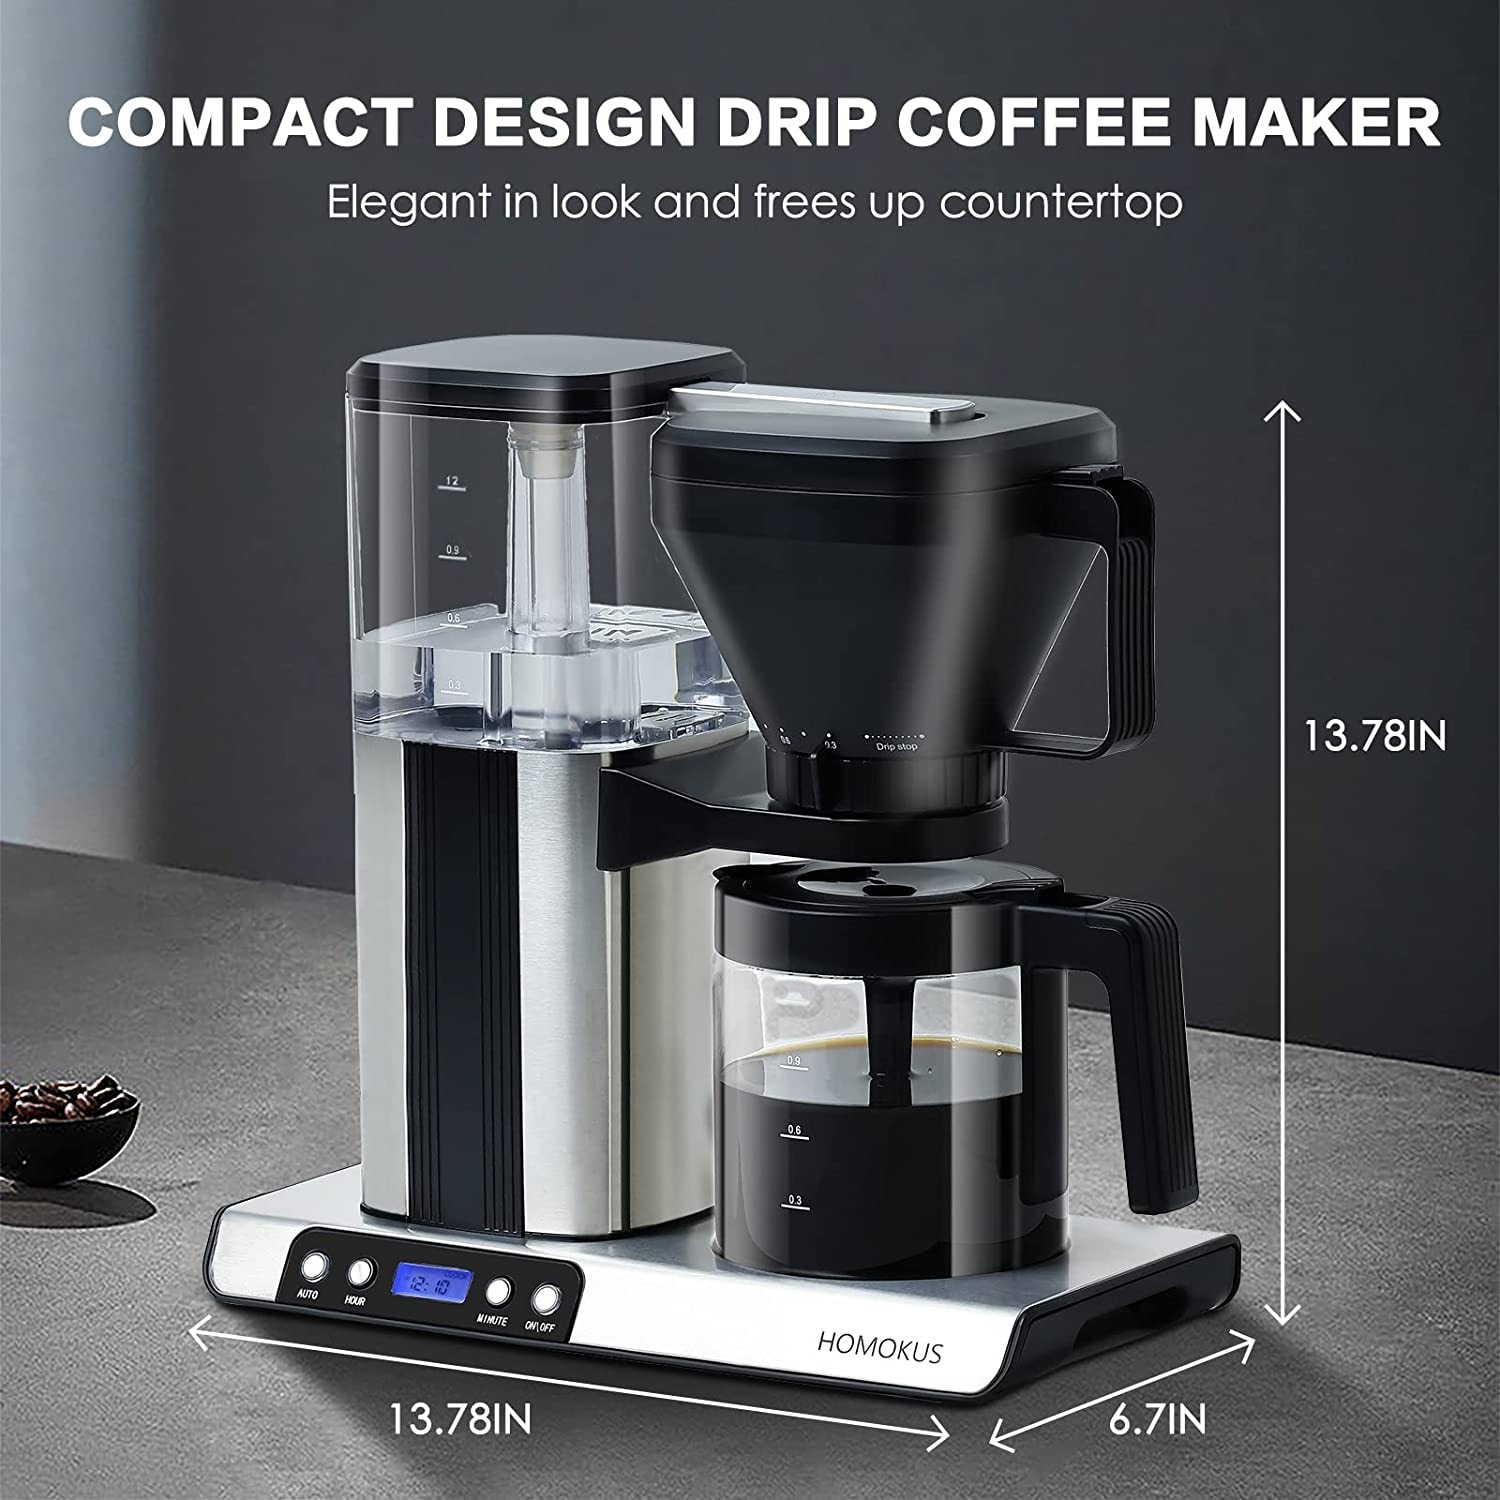 8 Cup Drip Coffee Maker - Stainless Steel Coffee Maker - Programmable Coffee Maker with Timer - As Picture